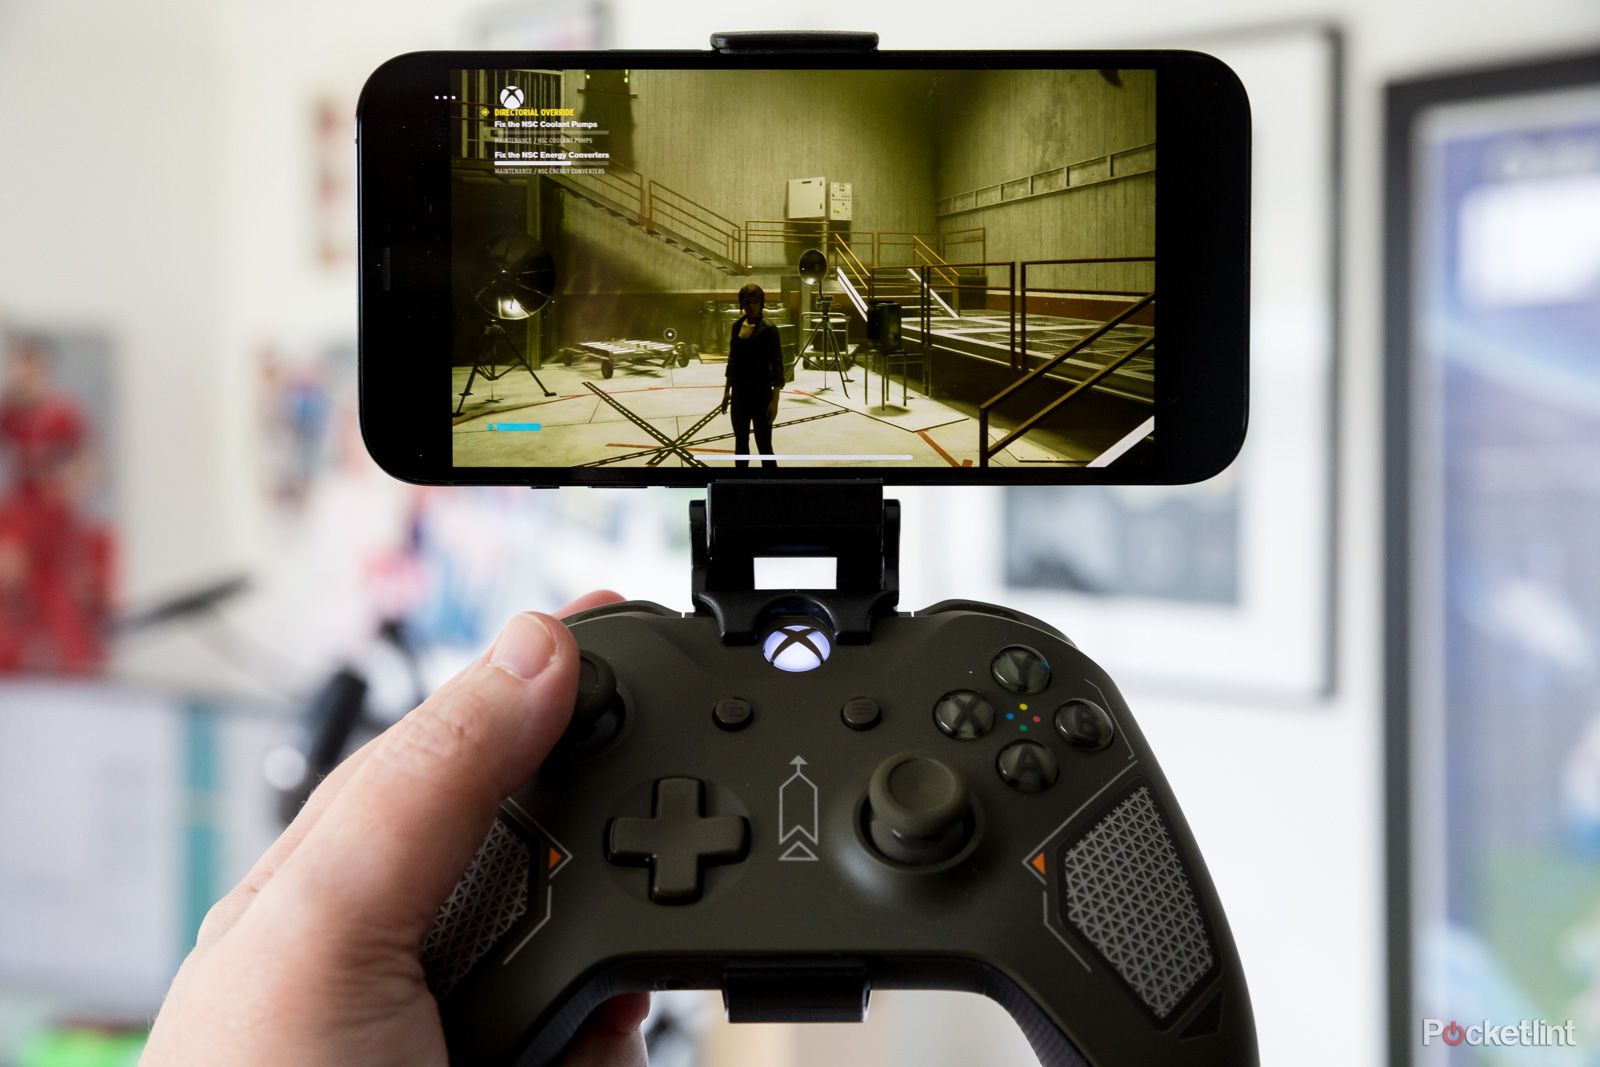 Xbox Cloud Gaming now available on iPhone, iPad, PC and Mac